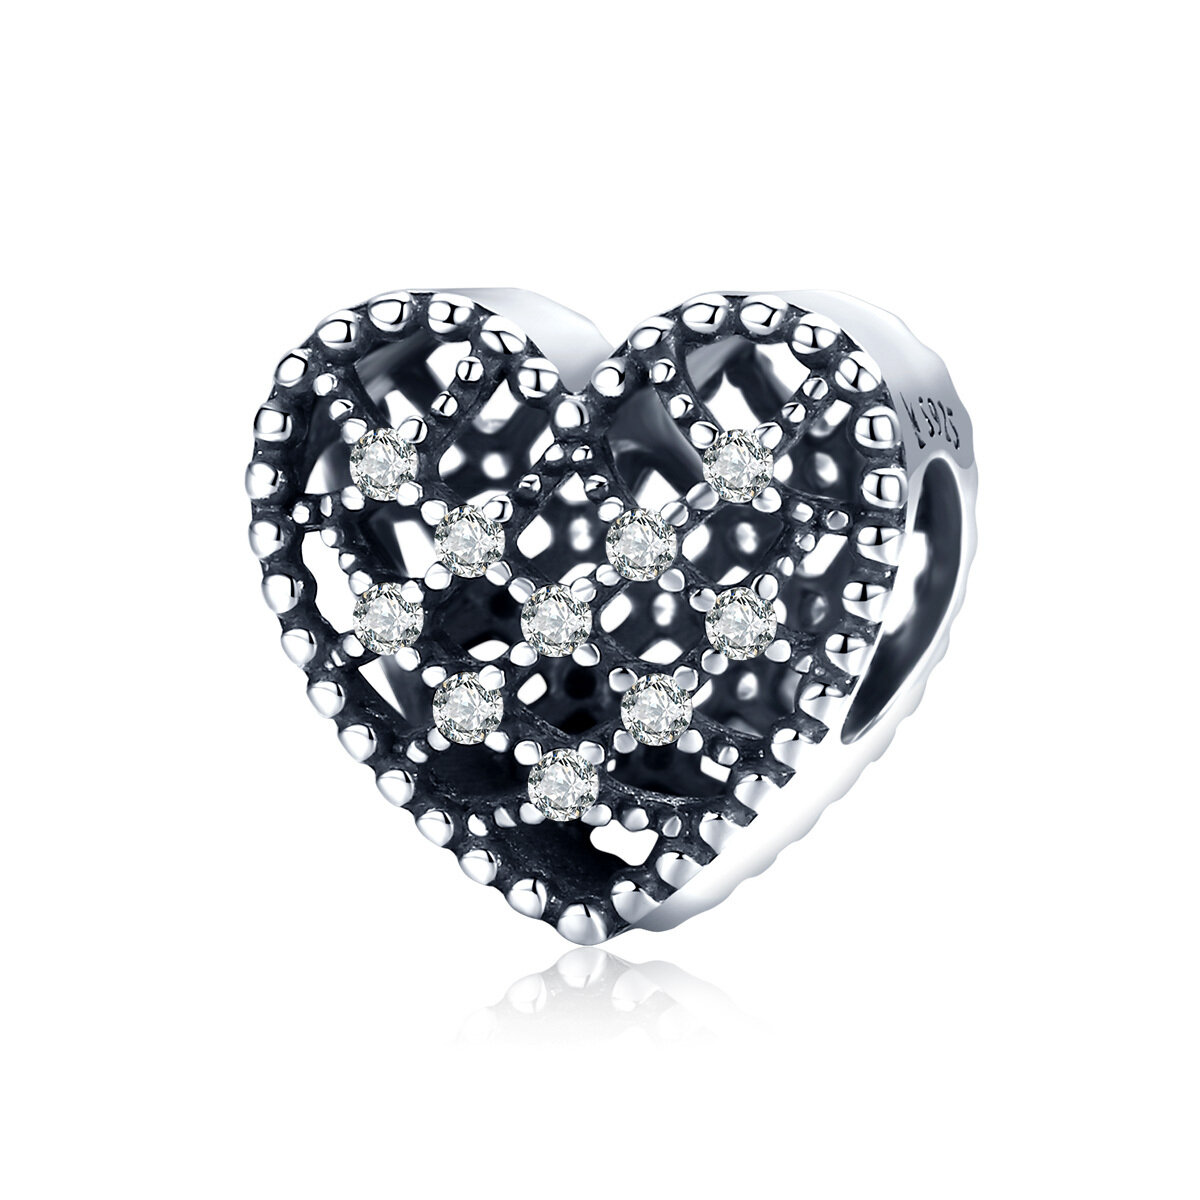 GemKing SCC1572 Shiny heart S925 Sterling Silver Charm